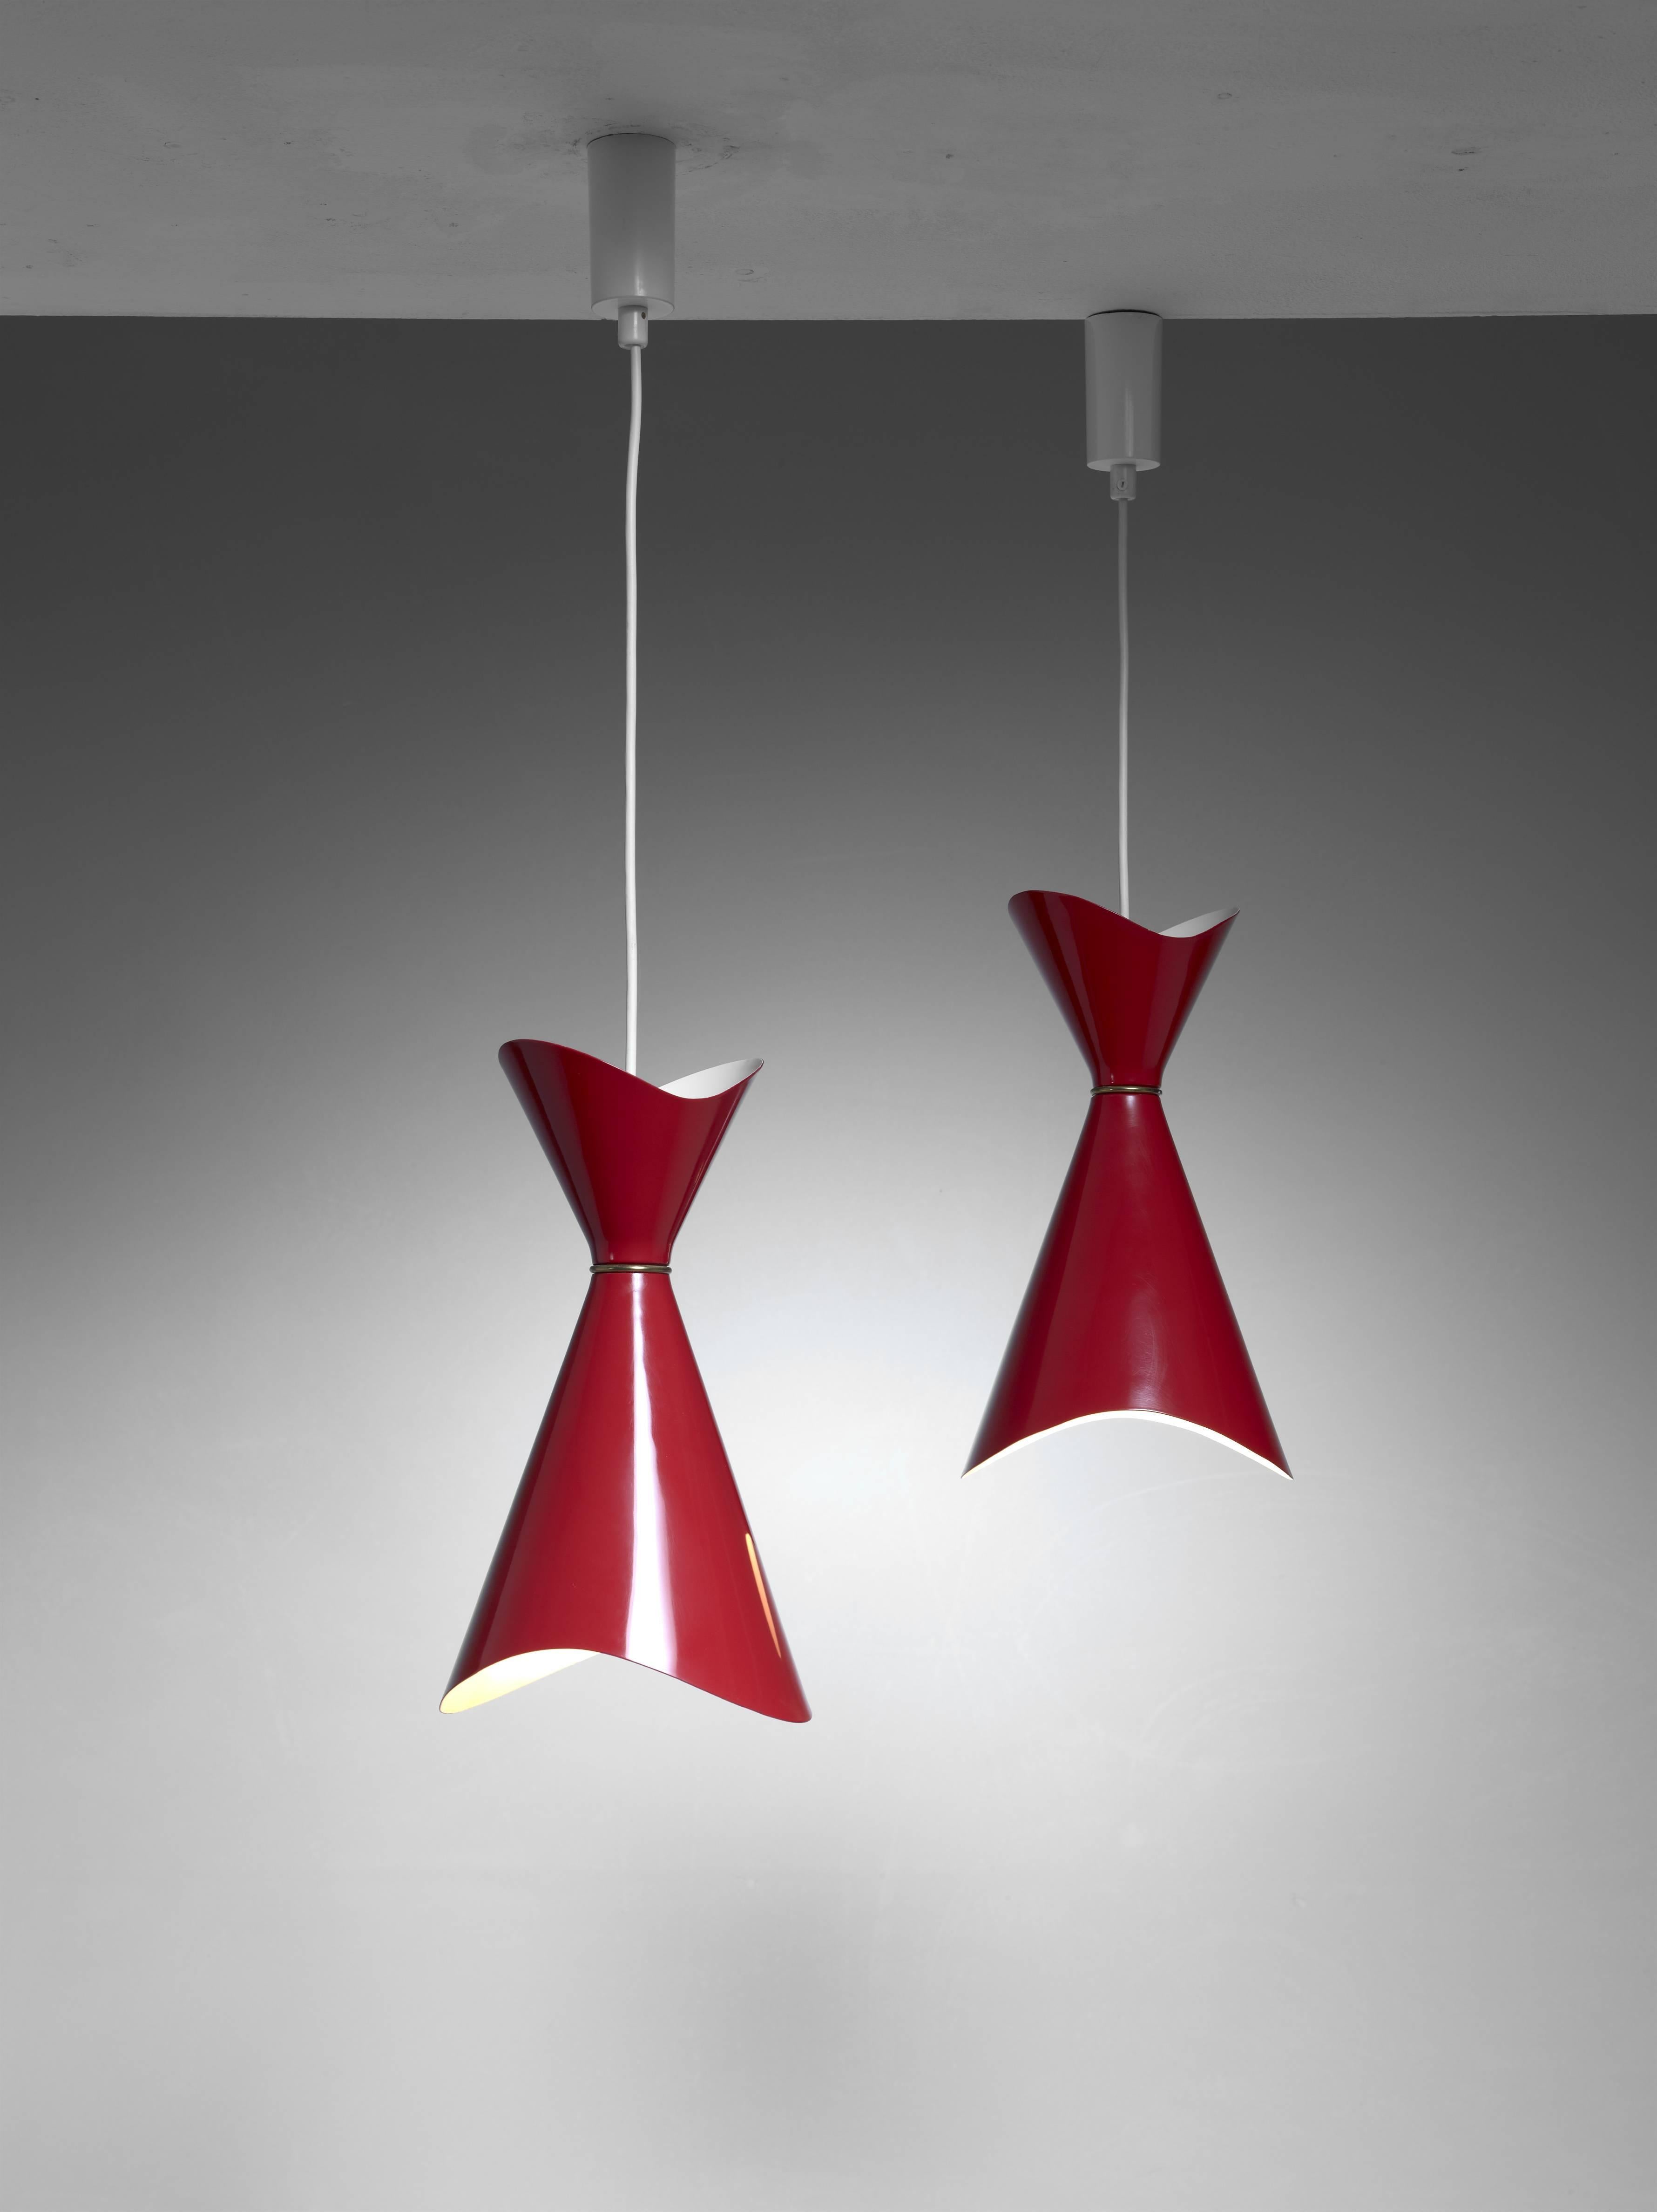 A pair of red metal 'Ninotchka' pendant lamps by Bent Karlby for Lyfa.

Karlby seems to have been inspired by the red hat of Greta Garbo in her title role in the 1939 MGM movie production 'Ninotchka'.

The total drop can be adjusted to your